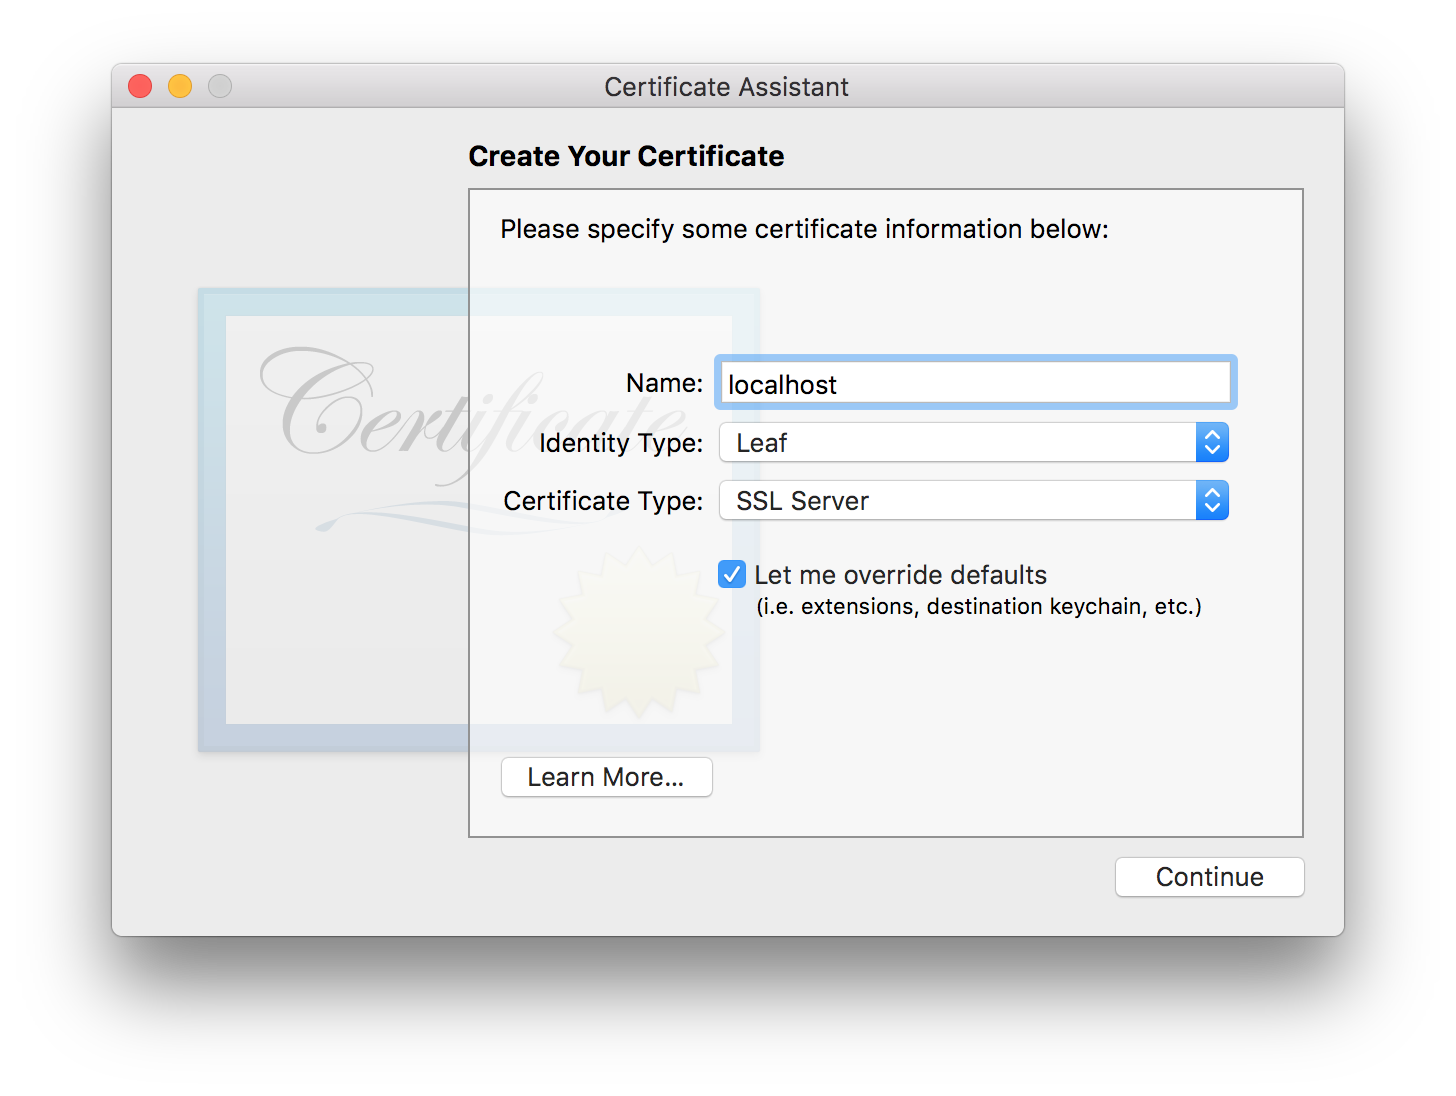 Mac os code. Keychain loading Certificate Android. Create your os.